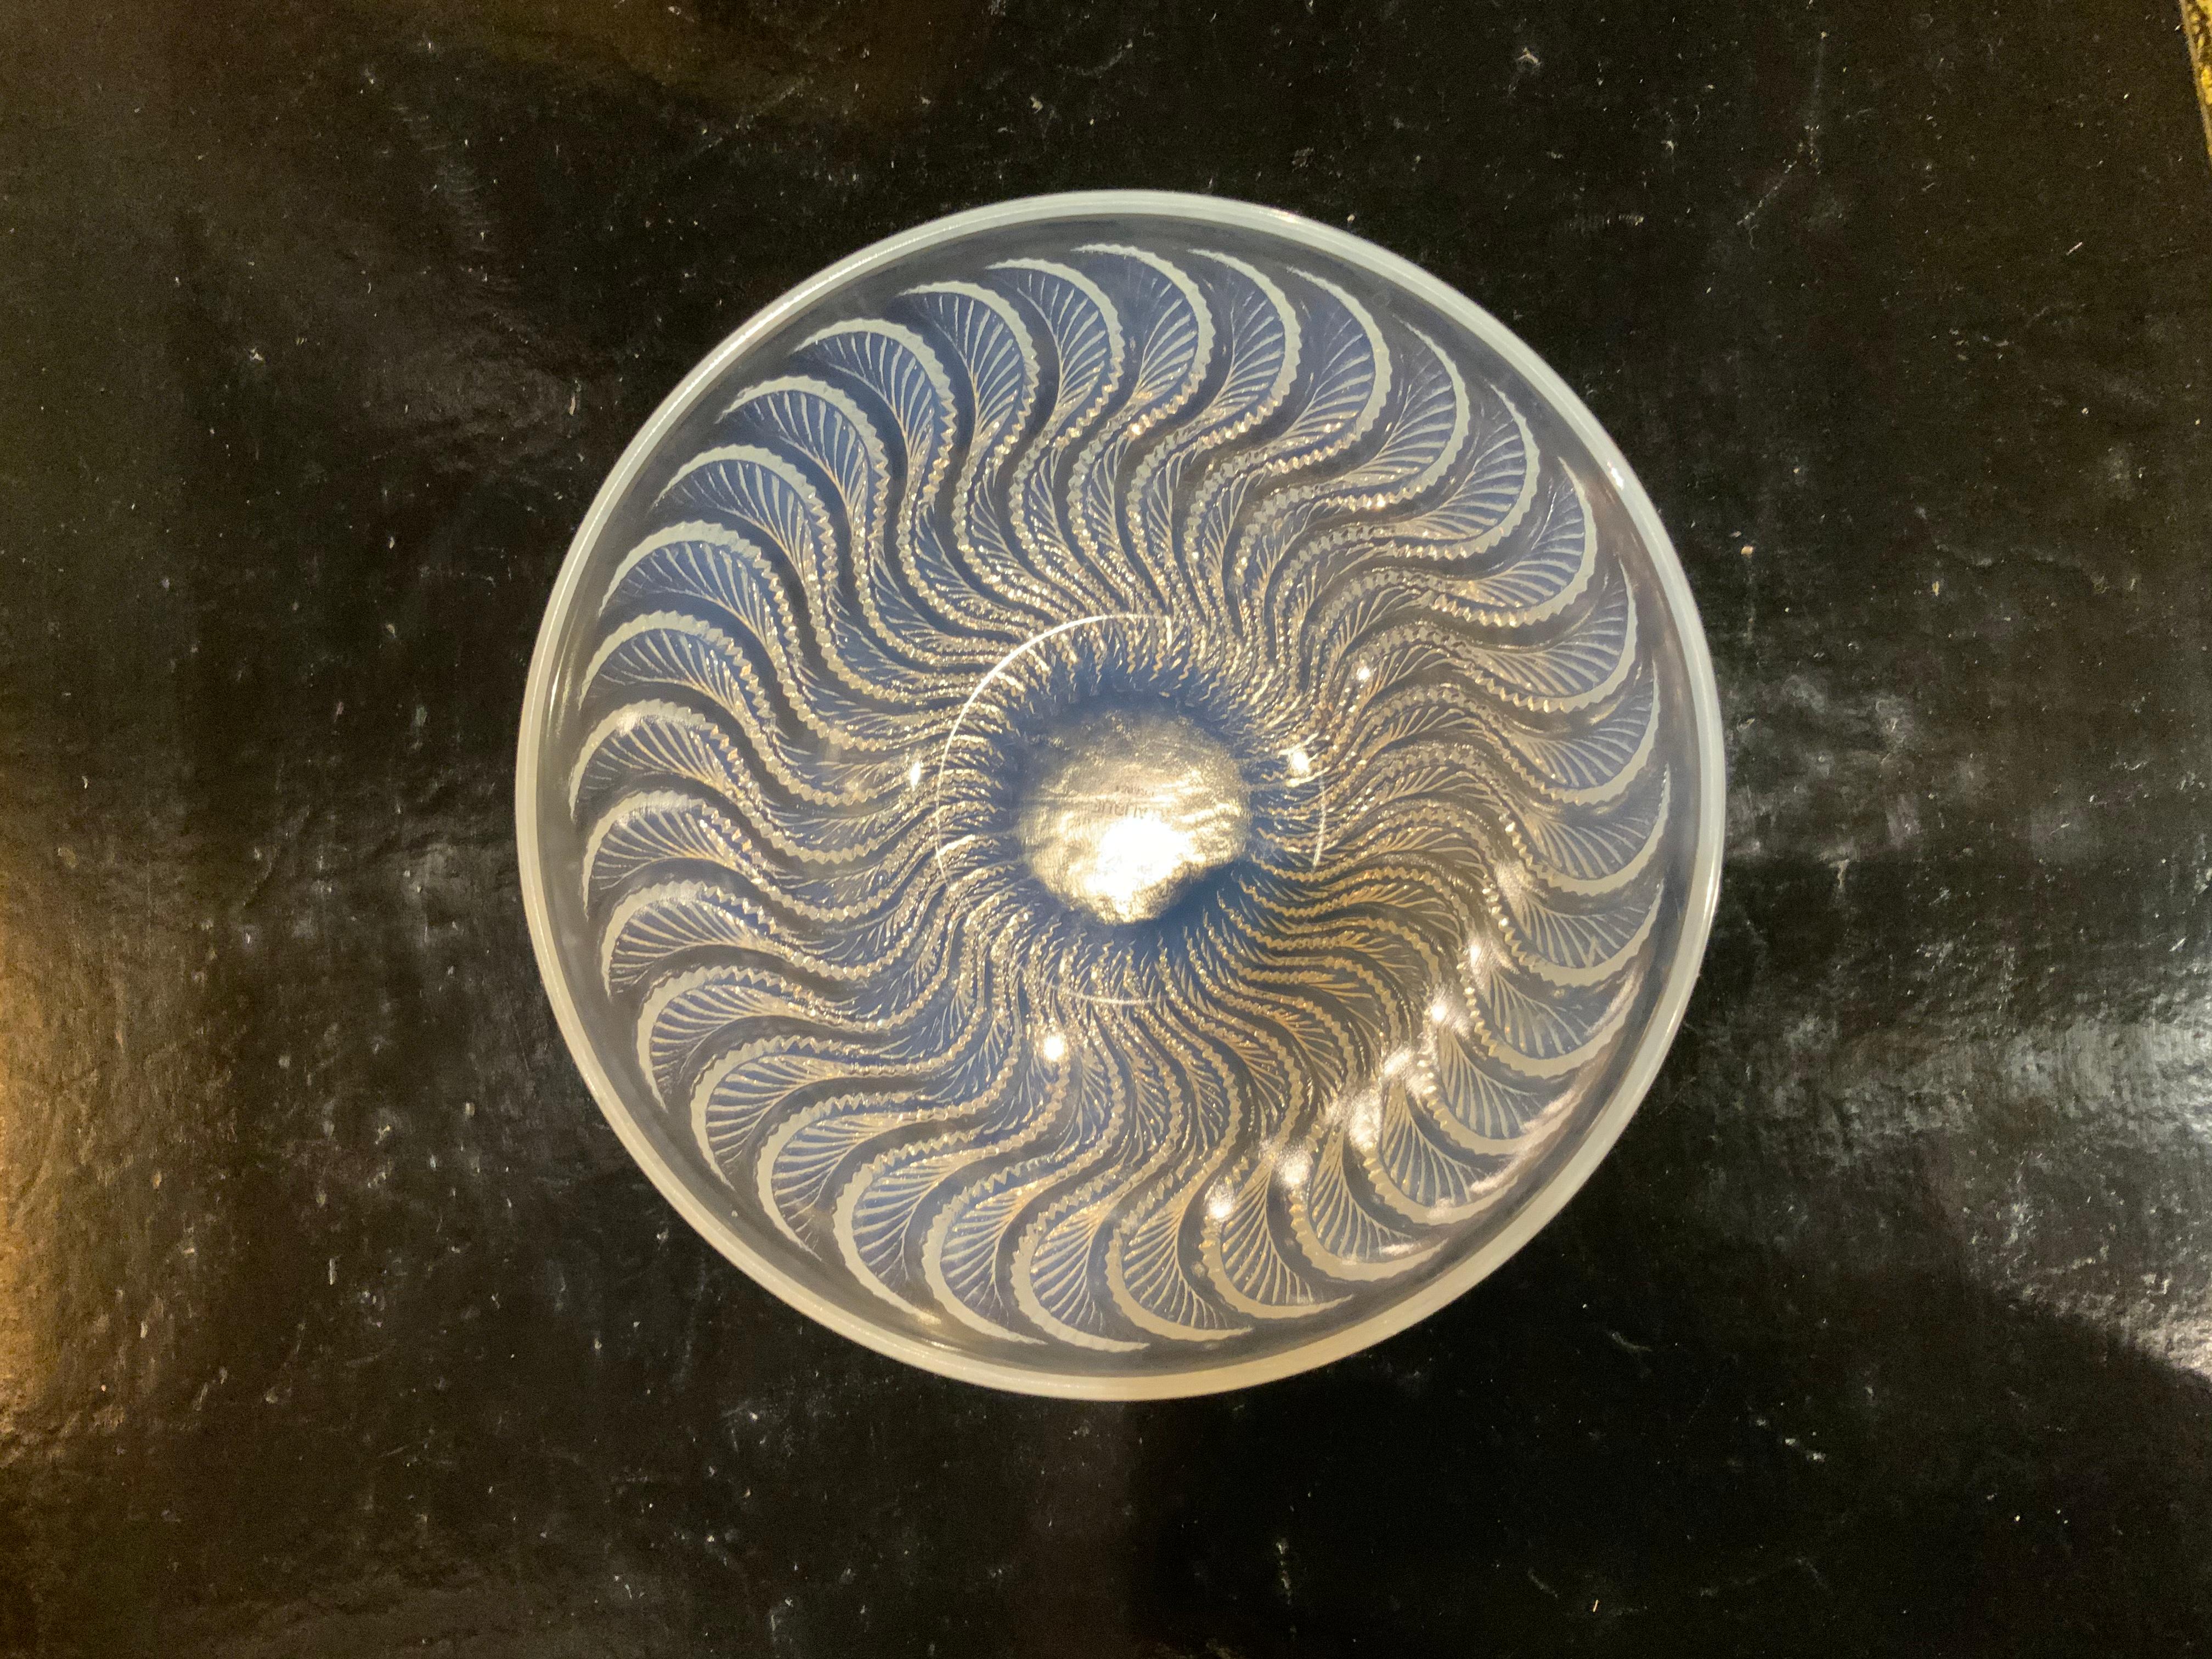 Lalique Iridescent Bowl with Feathered, Swirl Design Marked R Lalique In Excellent Condition For Sale In Houston, TX